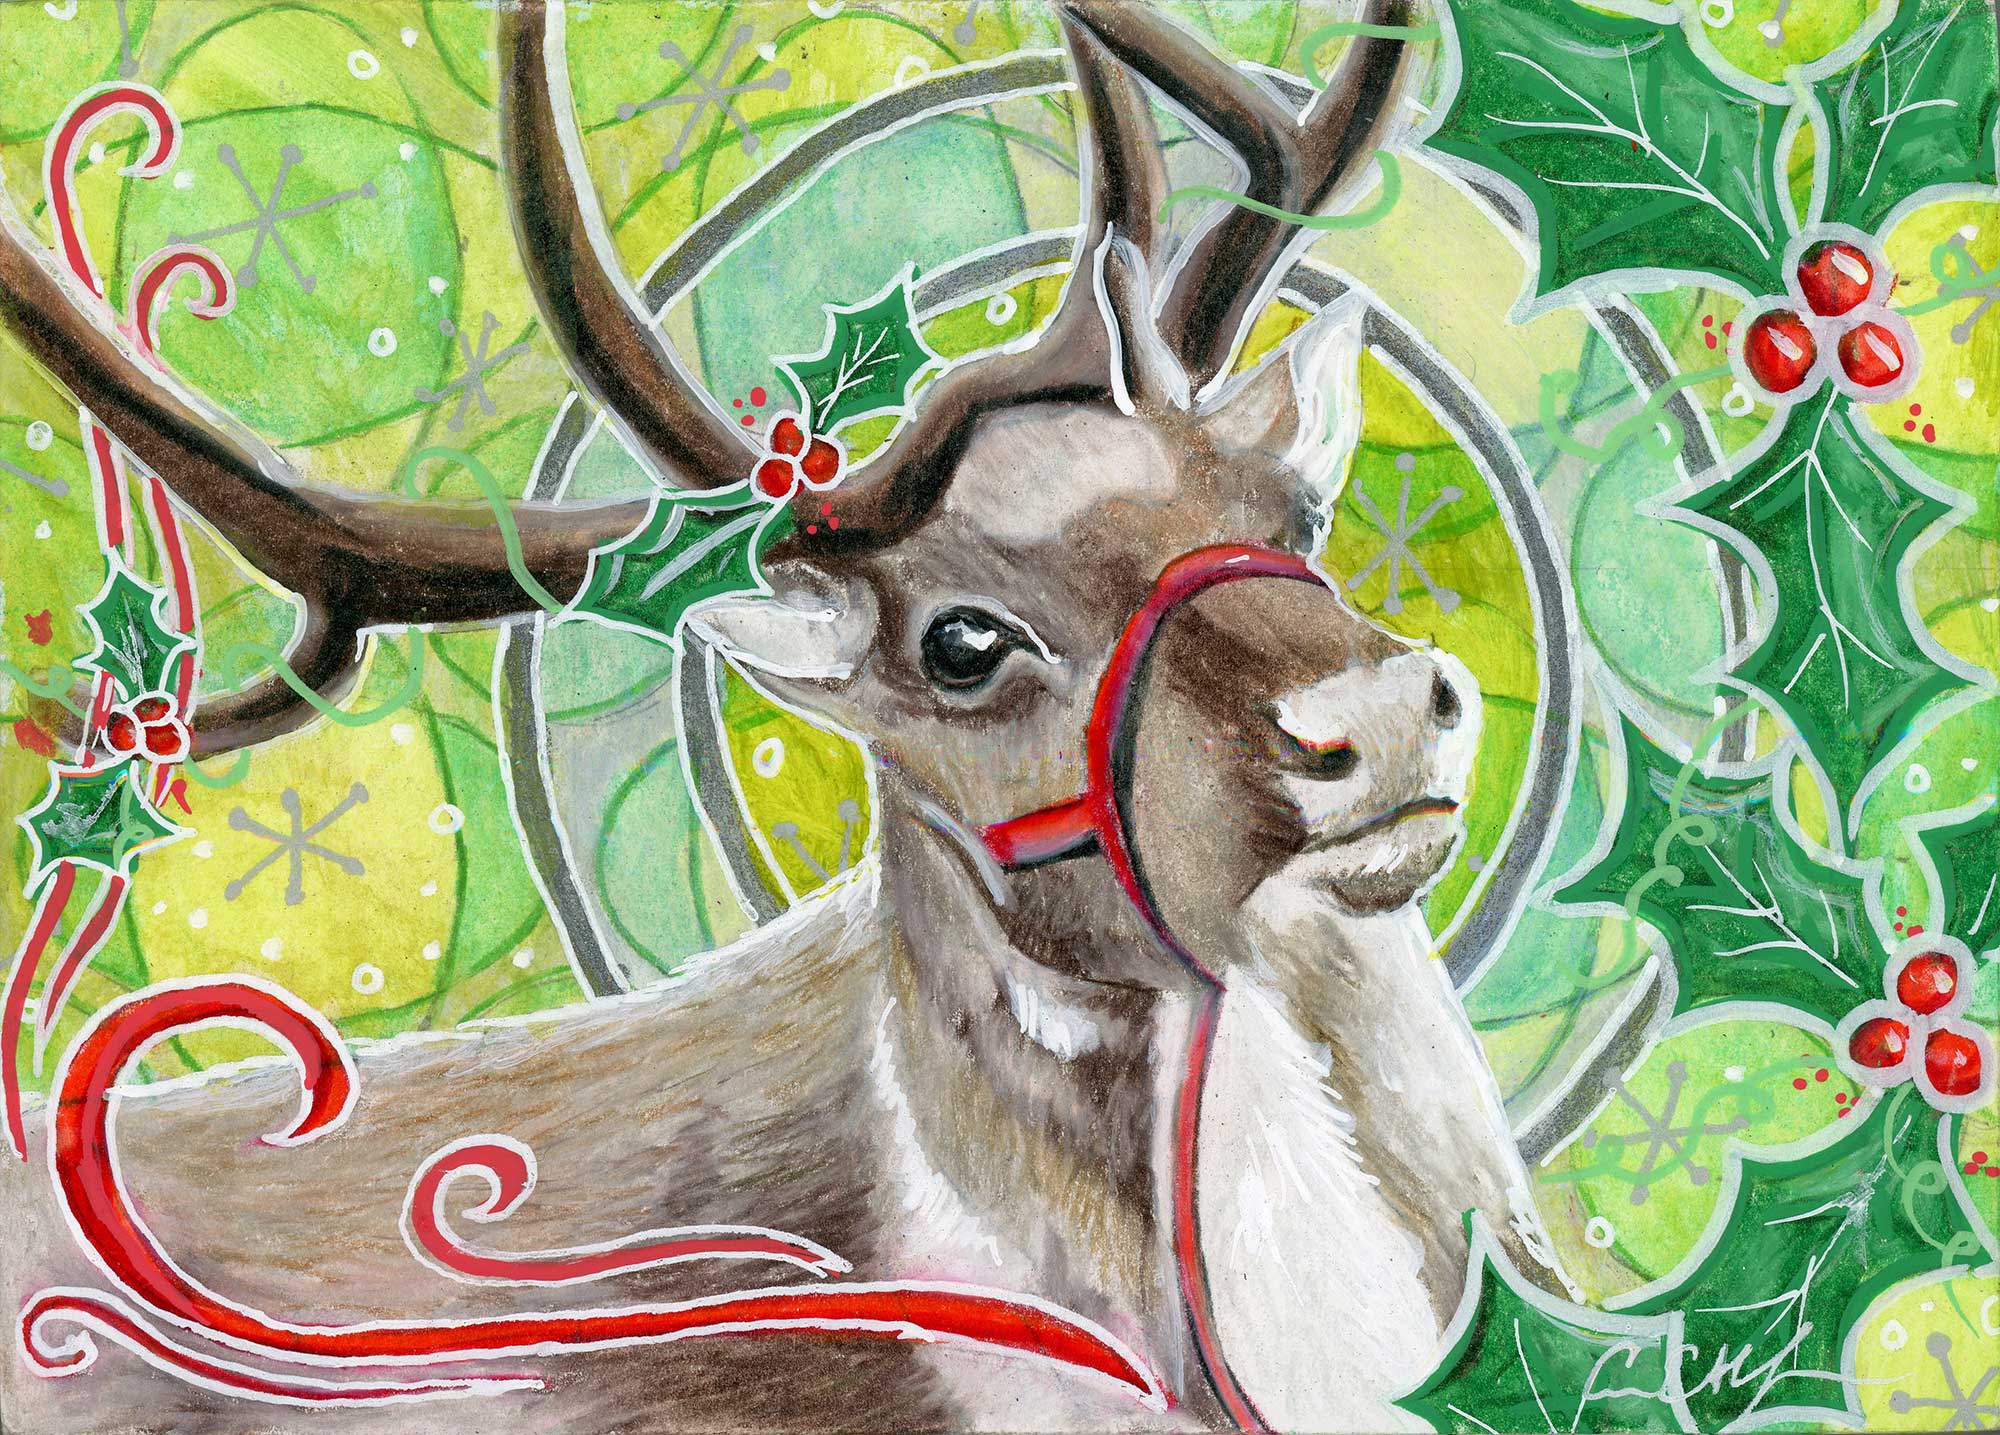 SOLD - "Reindeer and Holly", 7" x 7", mixed media